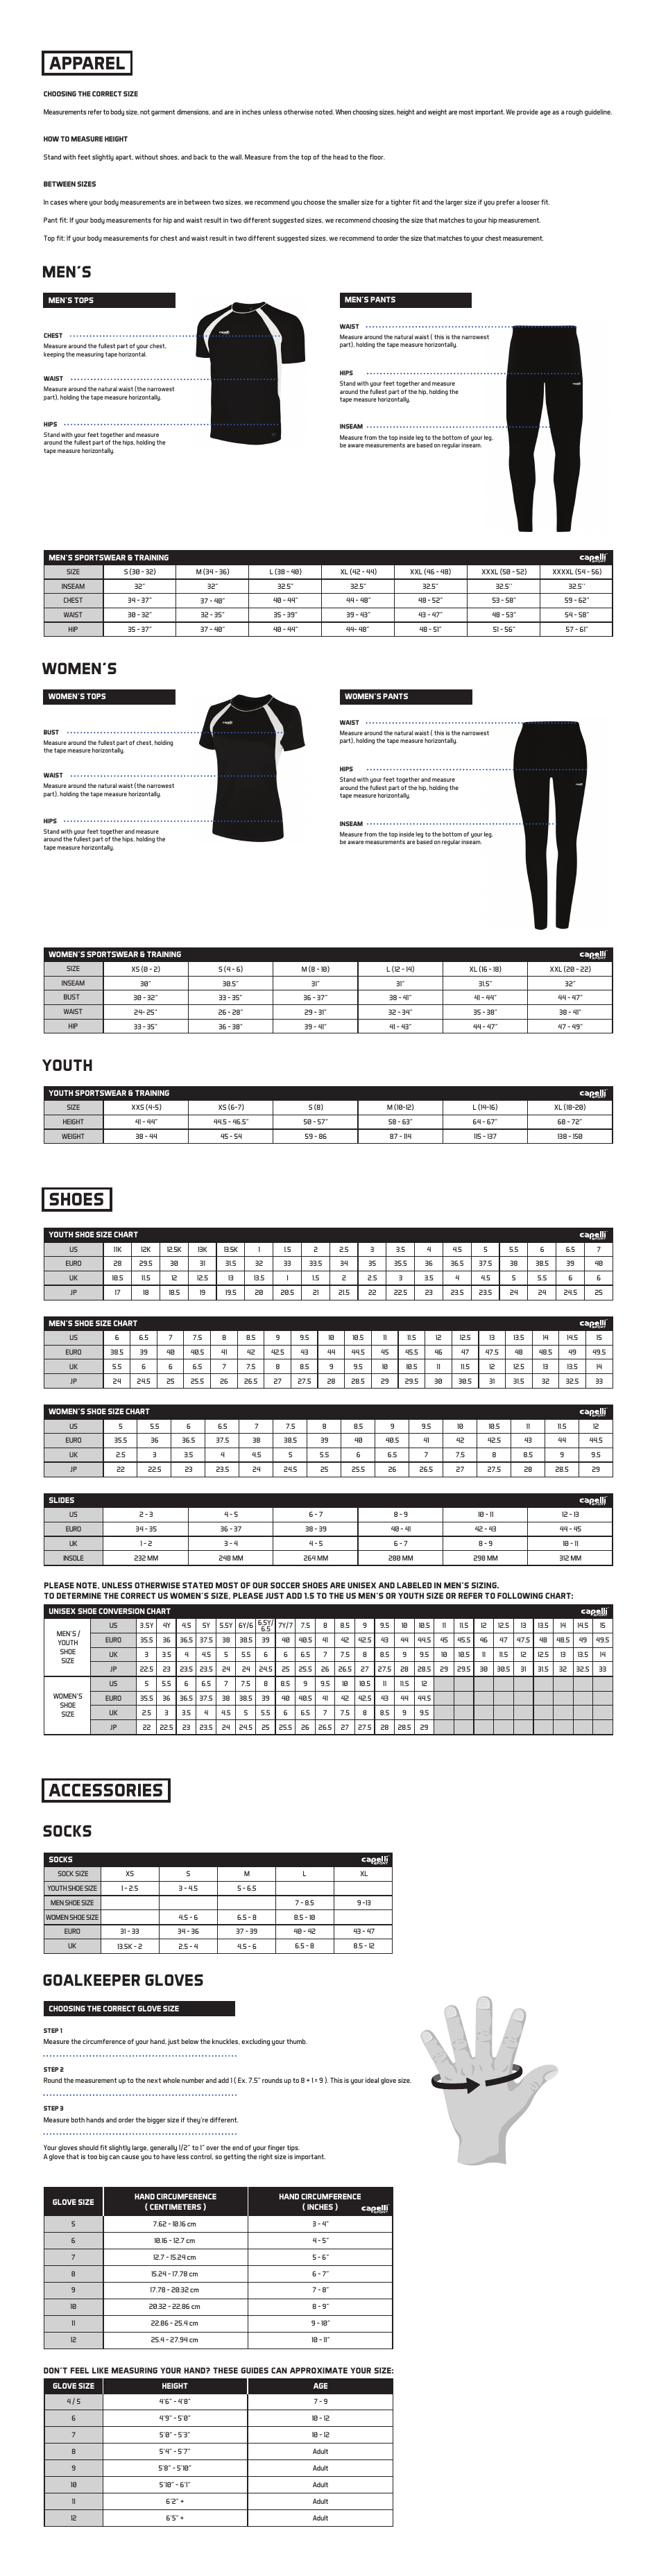 Capelli Sport Sportswear and Accessories Size Chart Preview